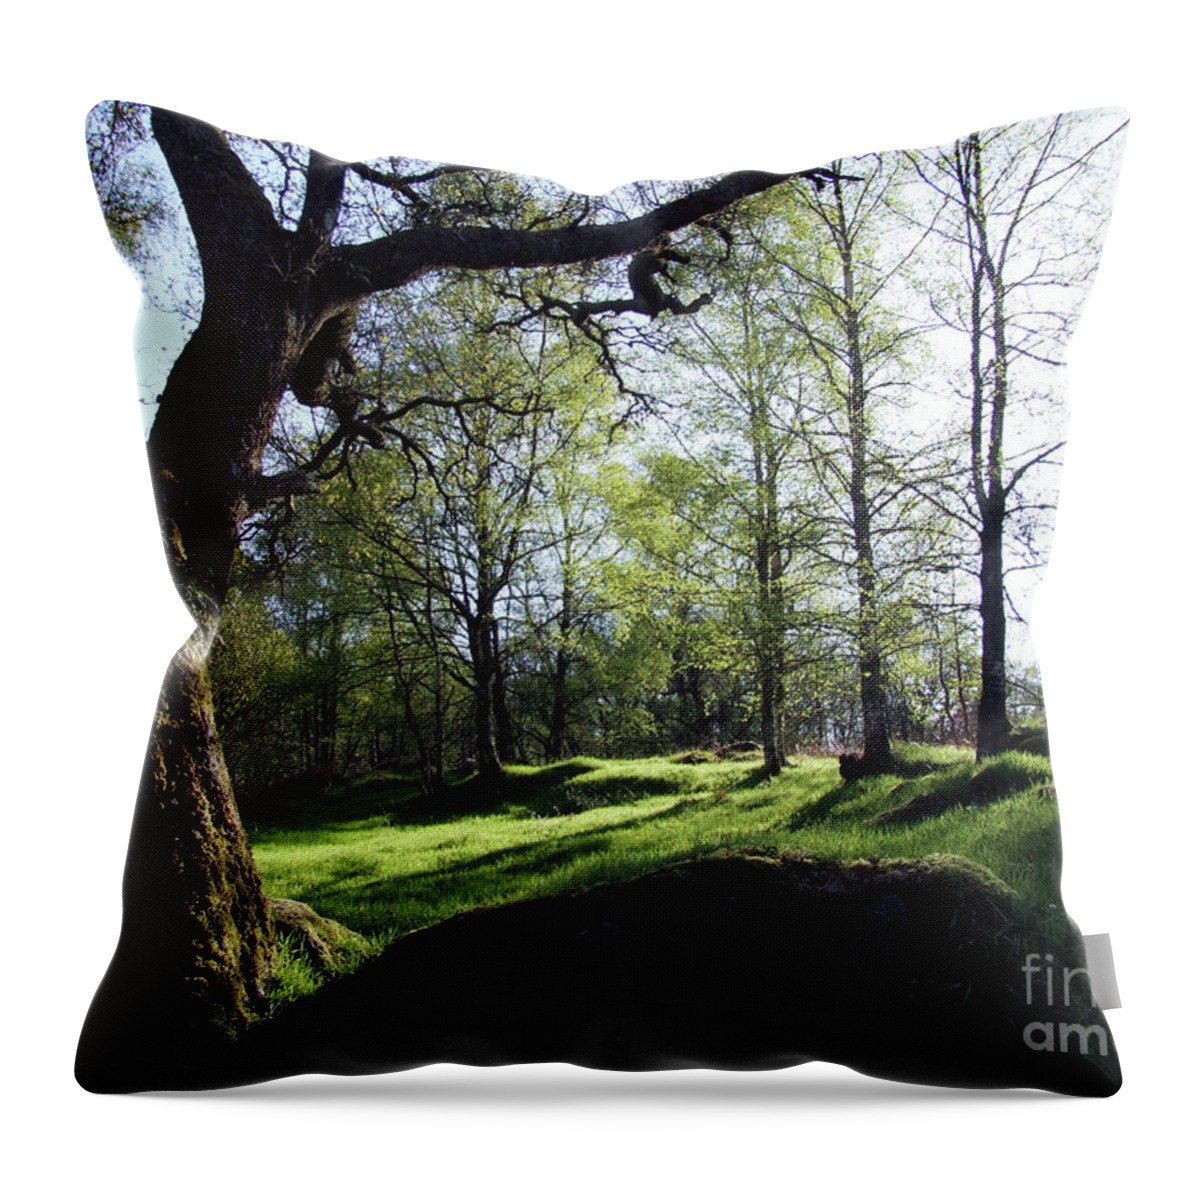 Birchwood Throw Pillow featuring the photograph Old Highland Birchwood by Phil Banks